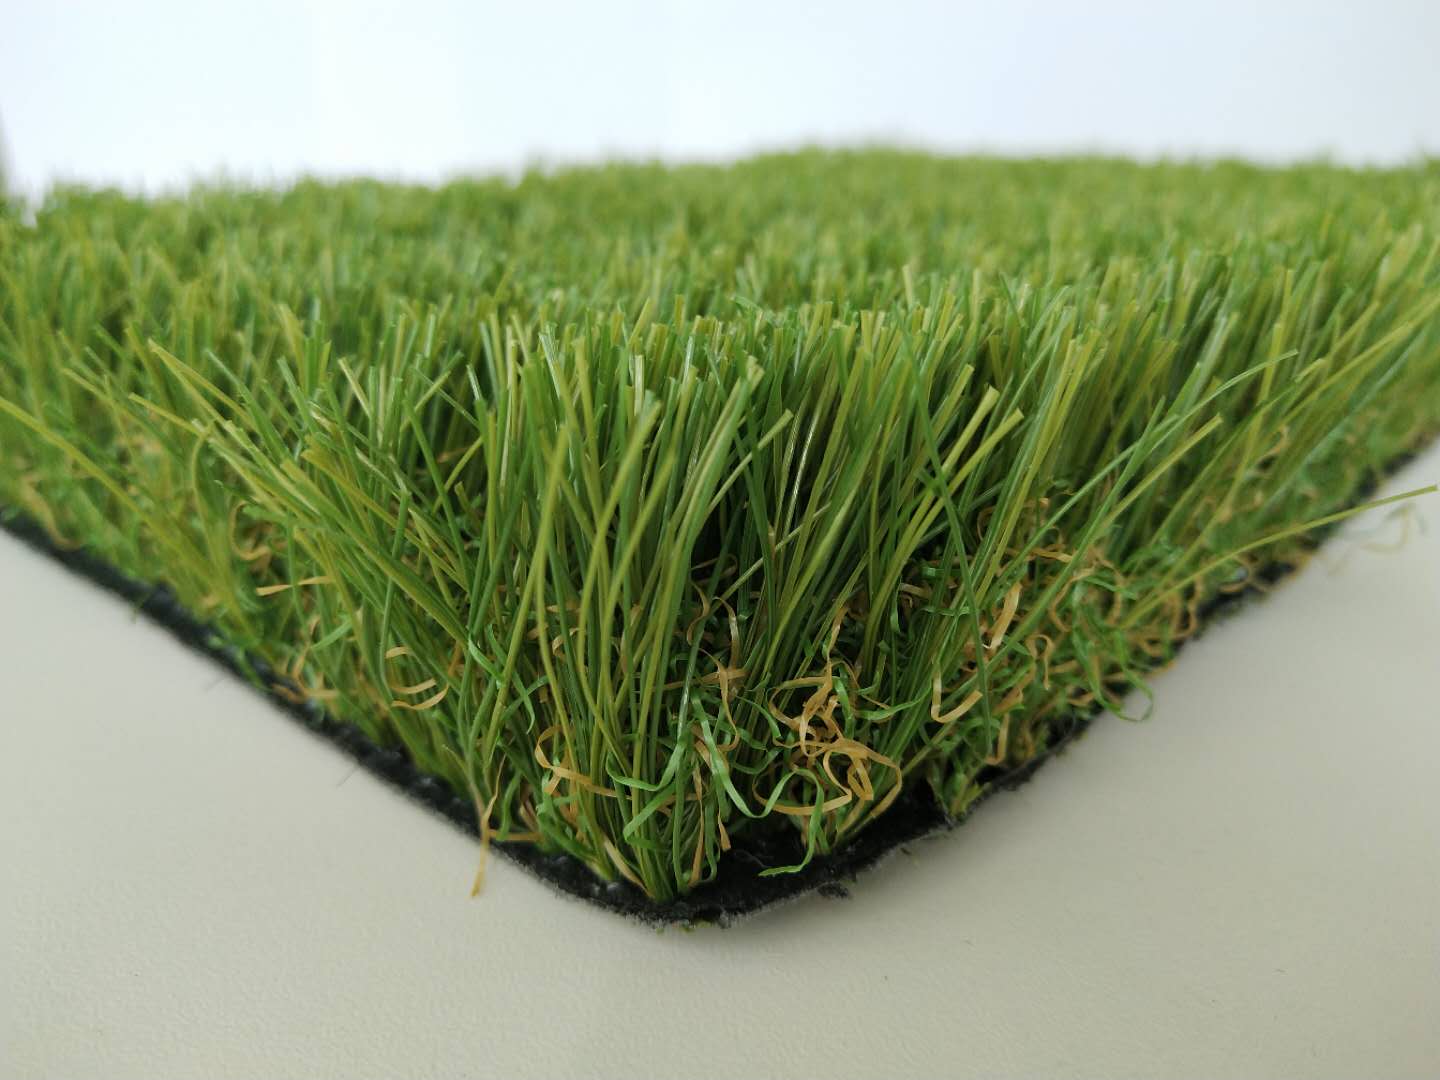 Wearable safe playgroud turf for schools